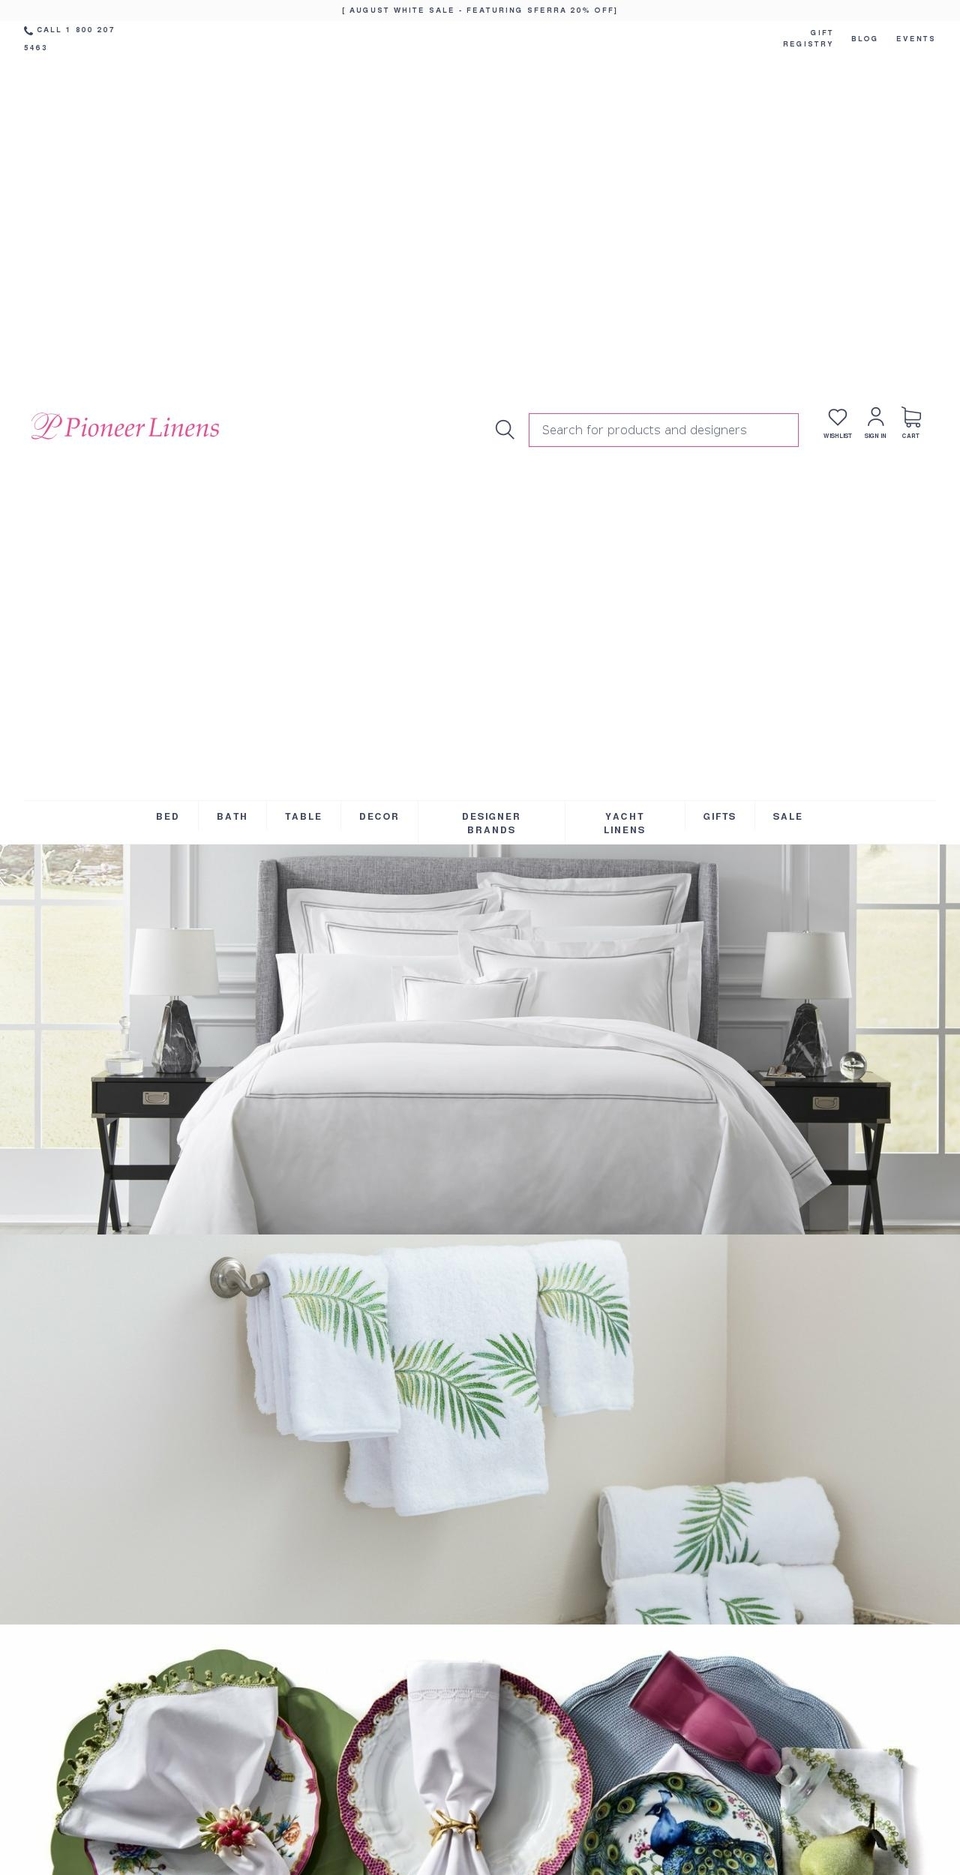 Buko Shopify Theme - Products Consolidation Shopify theme site example pioneer-linens.info